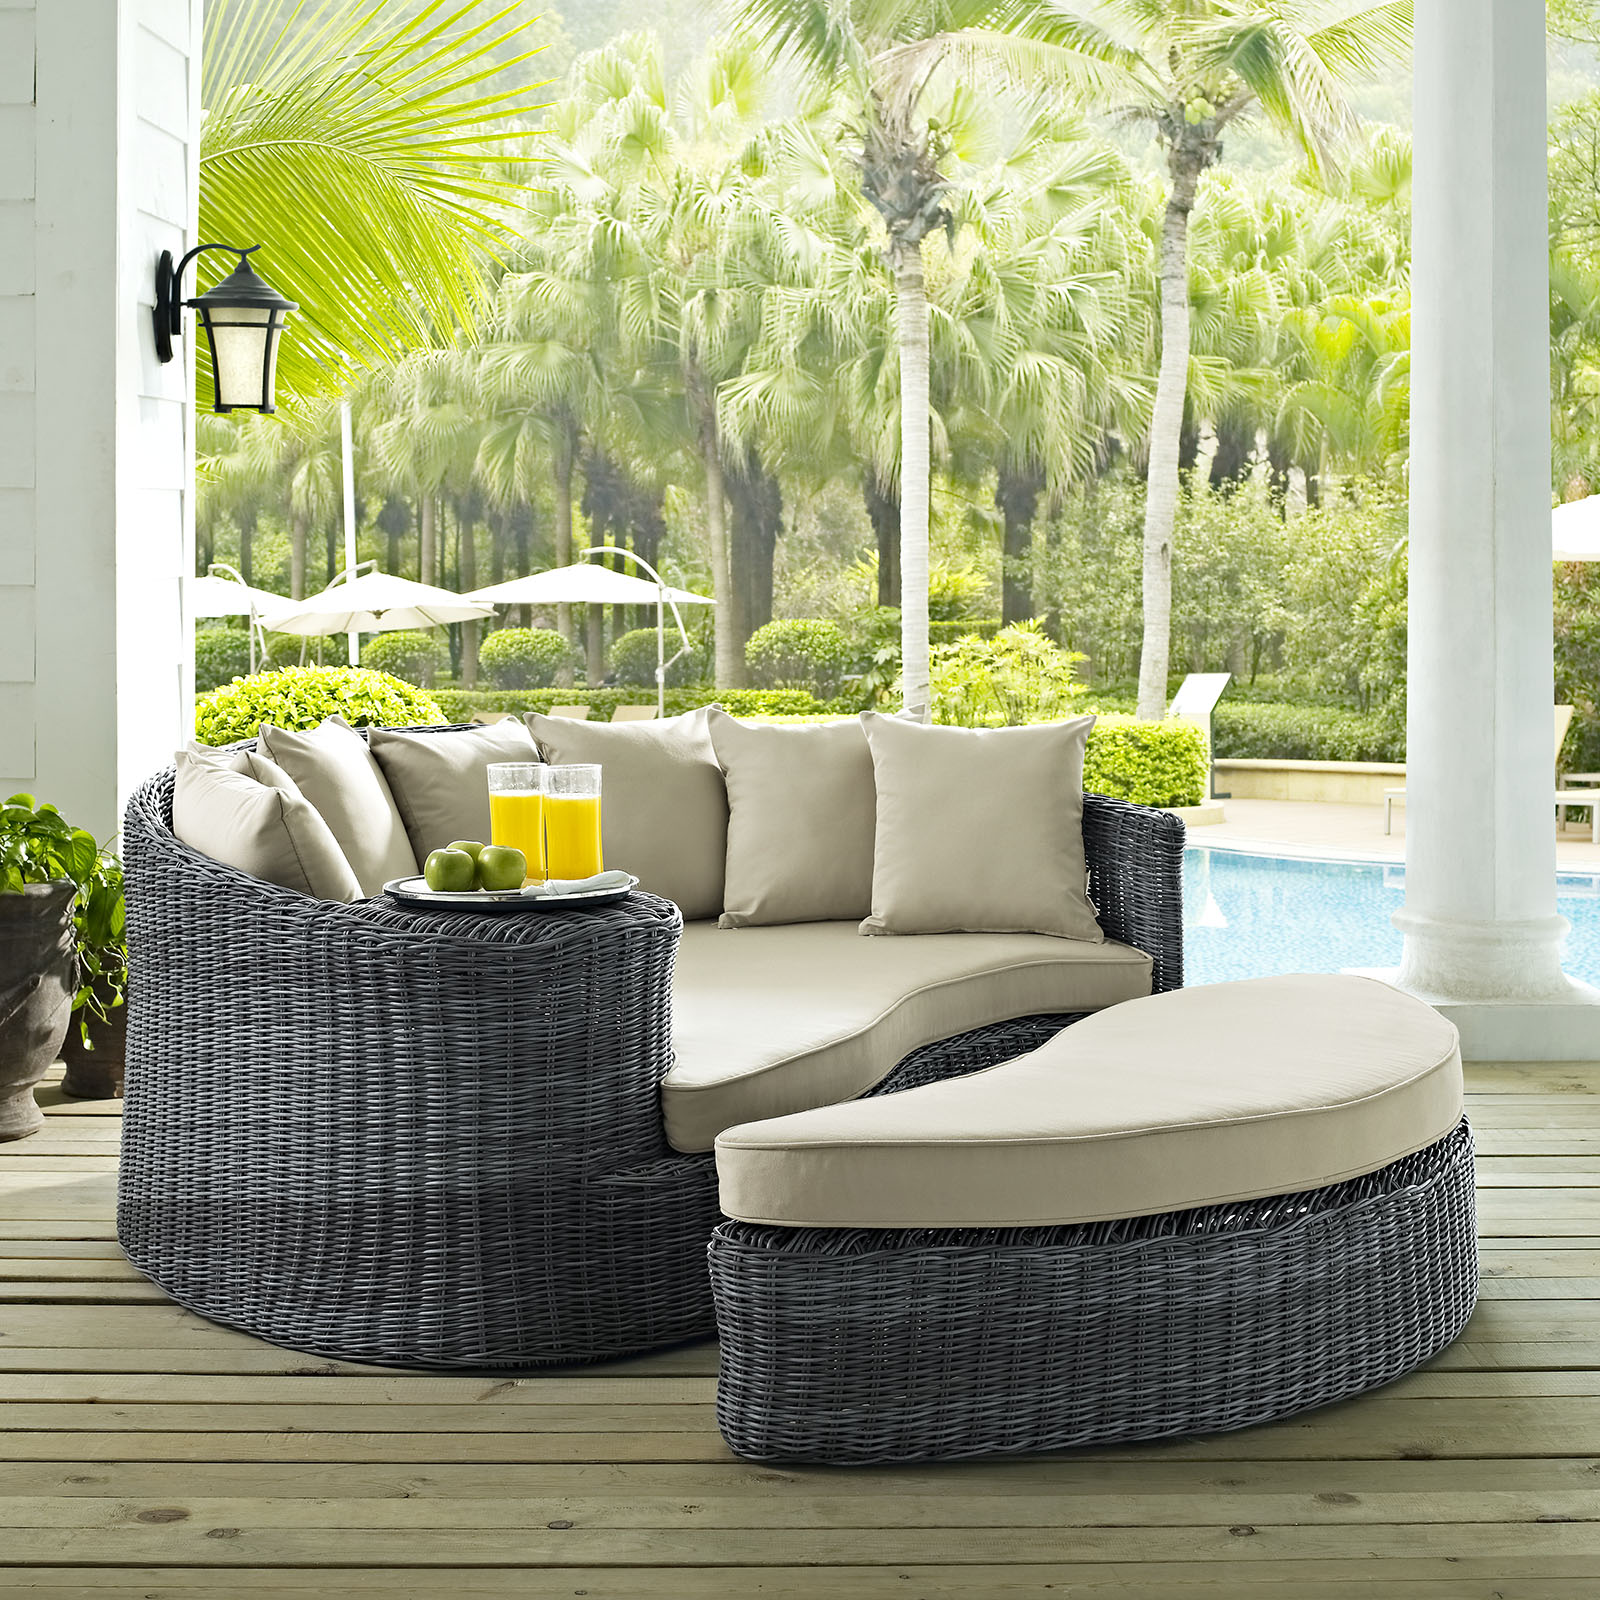 Modern Contemporary Urban Design Outdoor Patio Balcony Daybed Sofa, Beige, Rattan - image 2 of 4